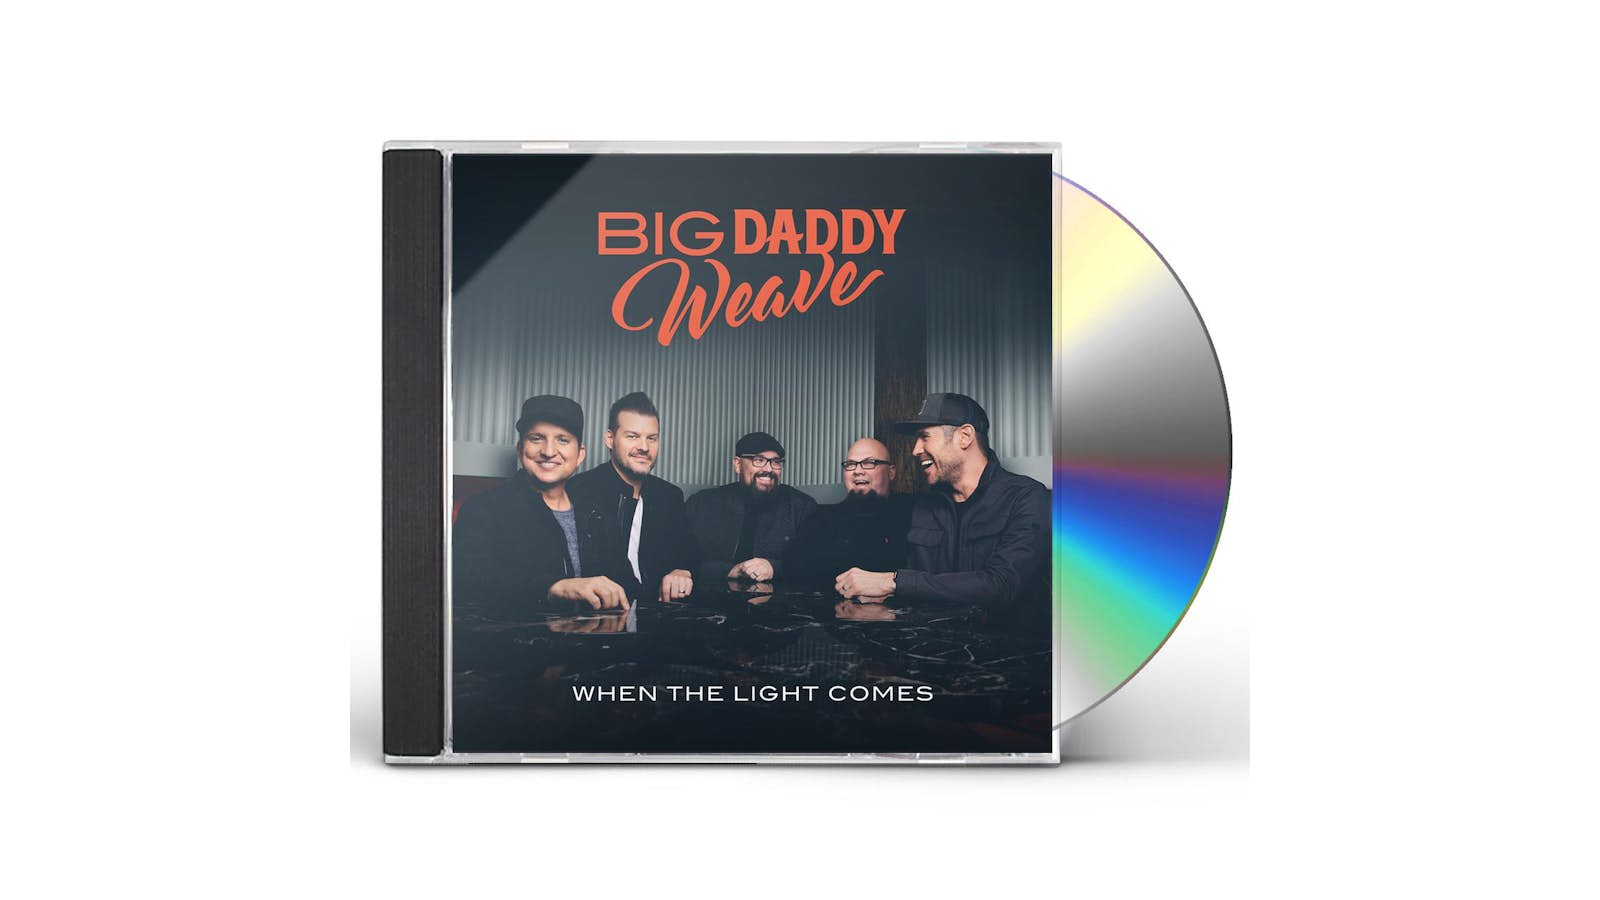 About  Big Daddy Weave